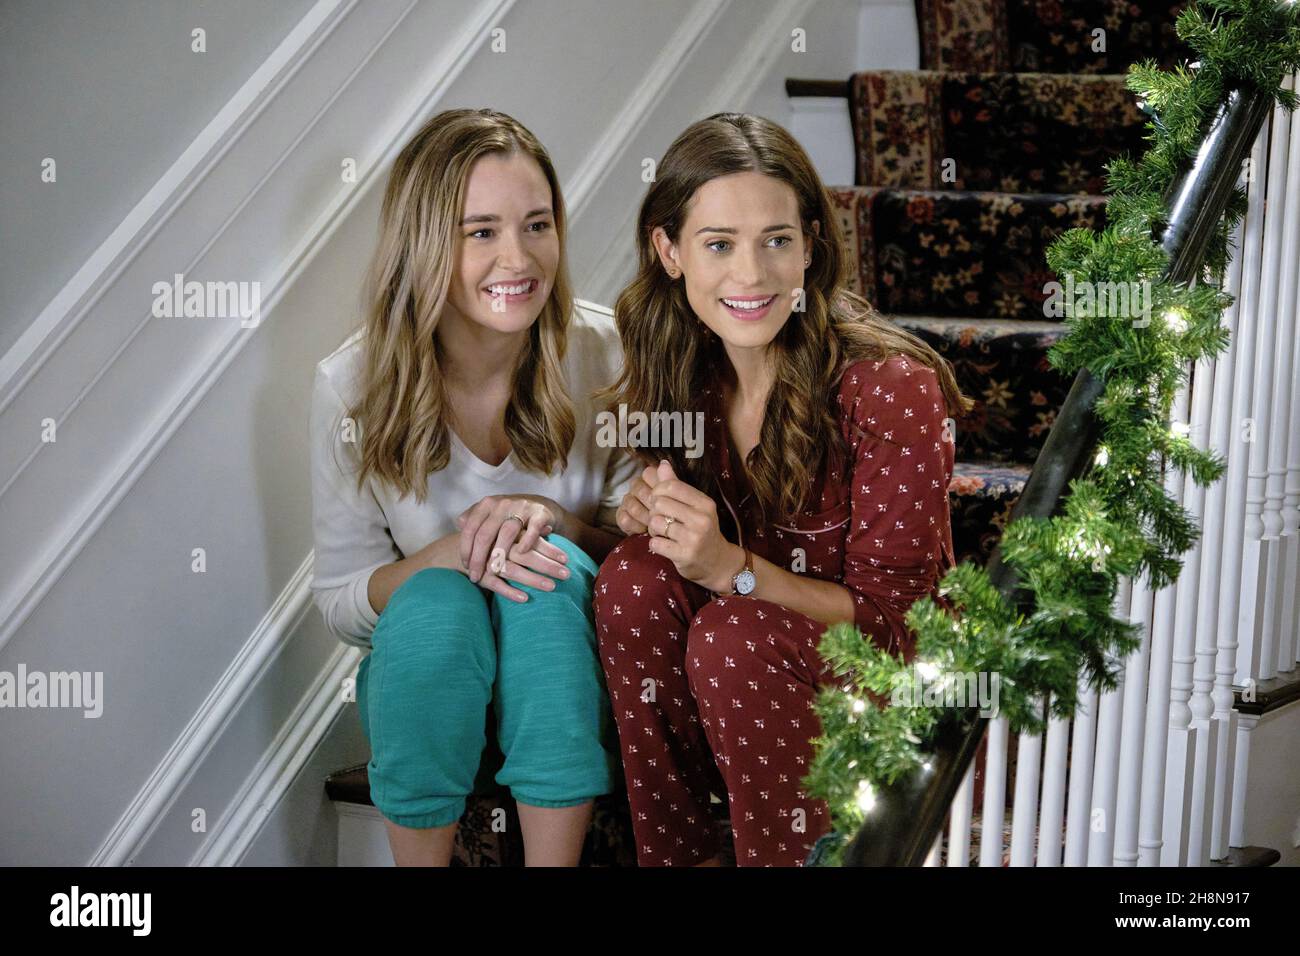 LYNDSY FONSECA in NEXT STOP, CHRISTMAS (2021), directed by DUSTIN RIKERT. Credit: Synthetic Cinema International / Album Stock Photo